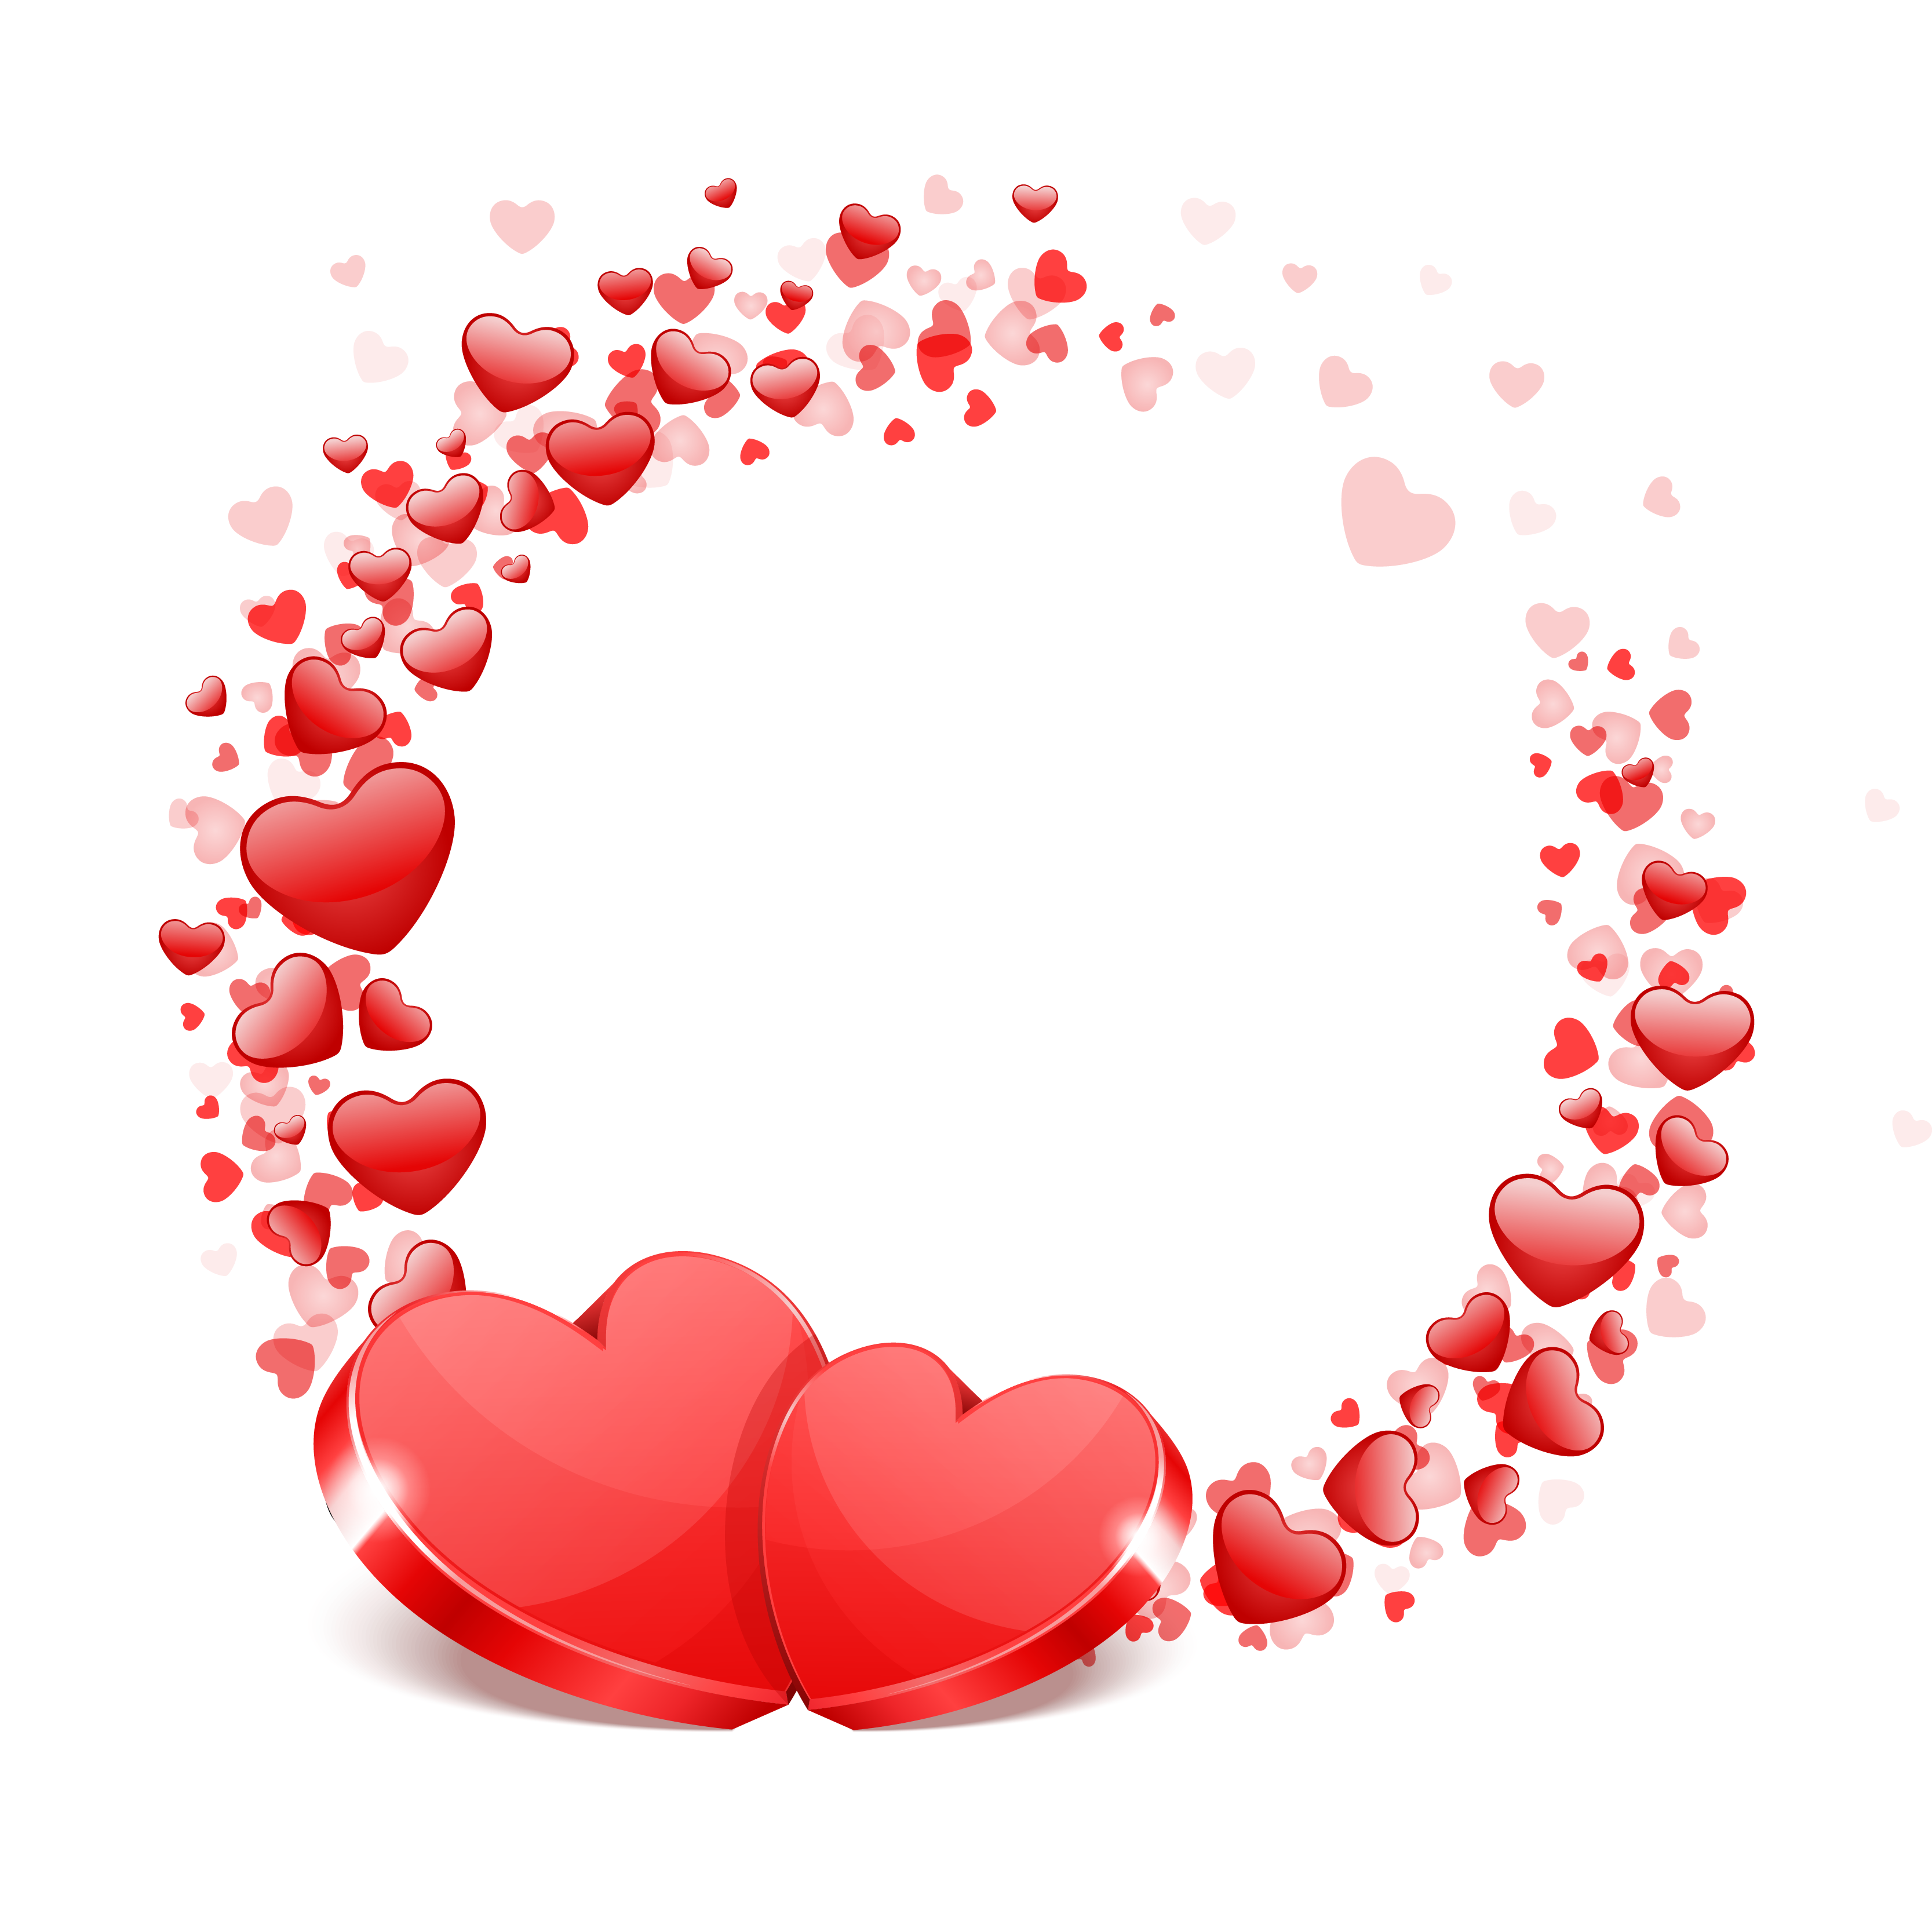 Heart Vector Valentine PNG Image High Quality PNG Image